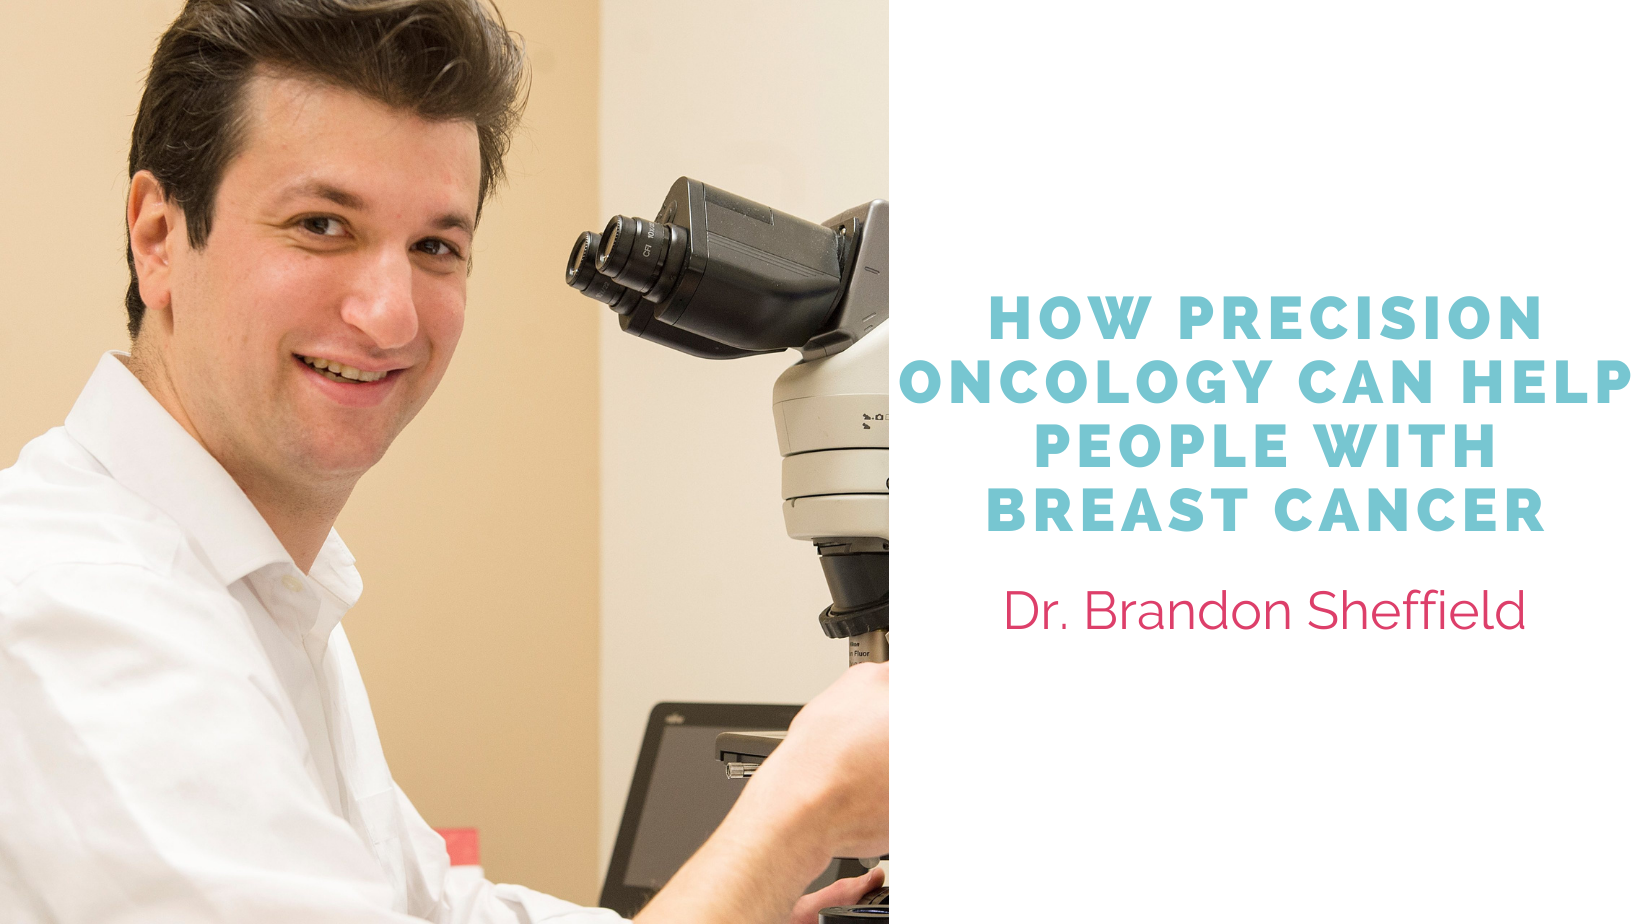 How Precision Oncology Can Help People with Breast Cancer with Dr. Brandon Sheffield